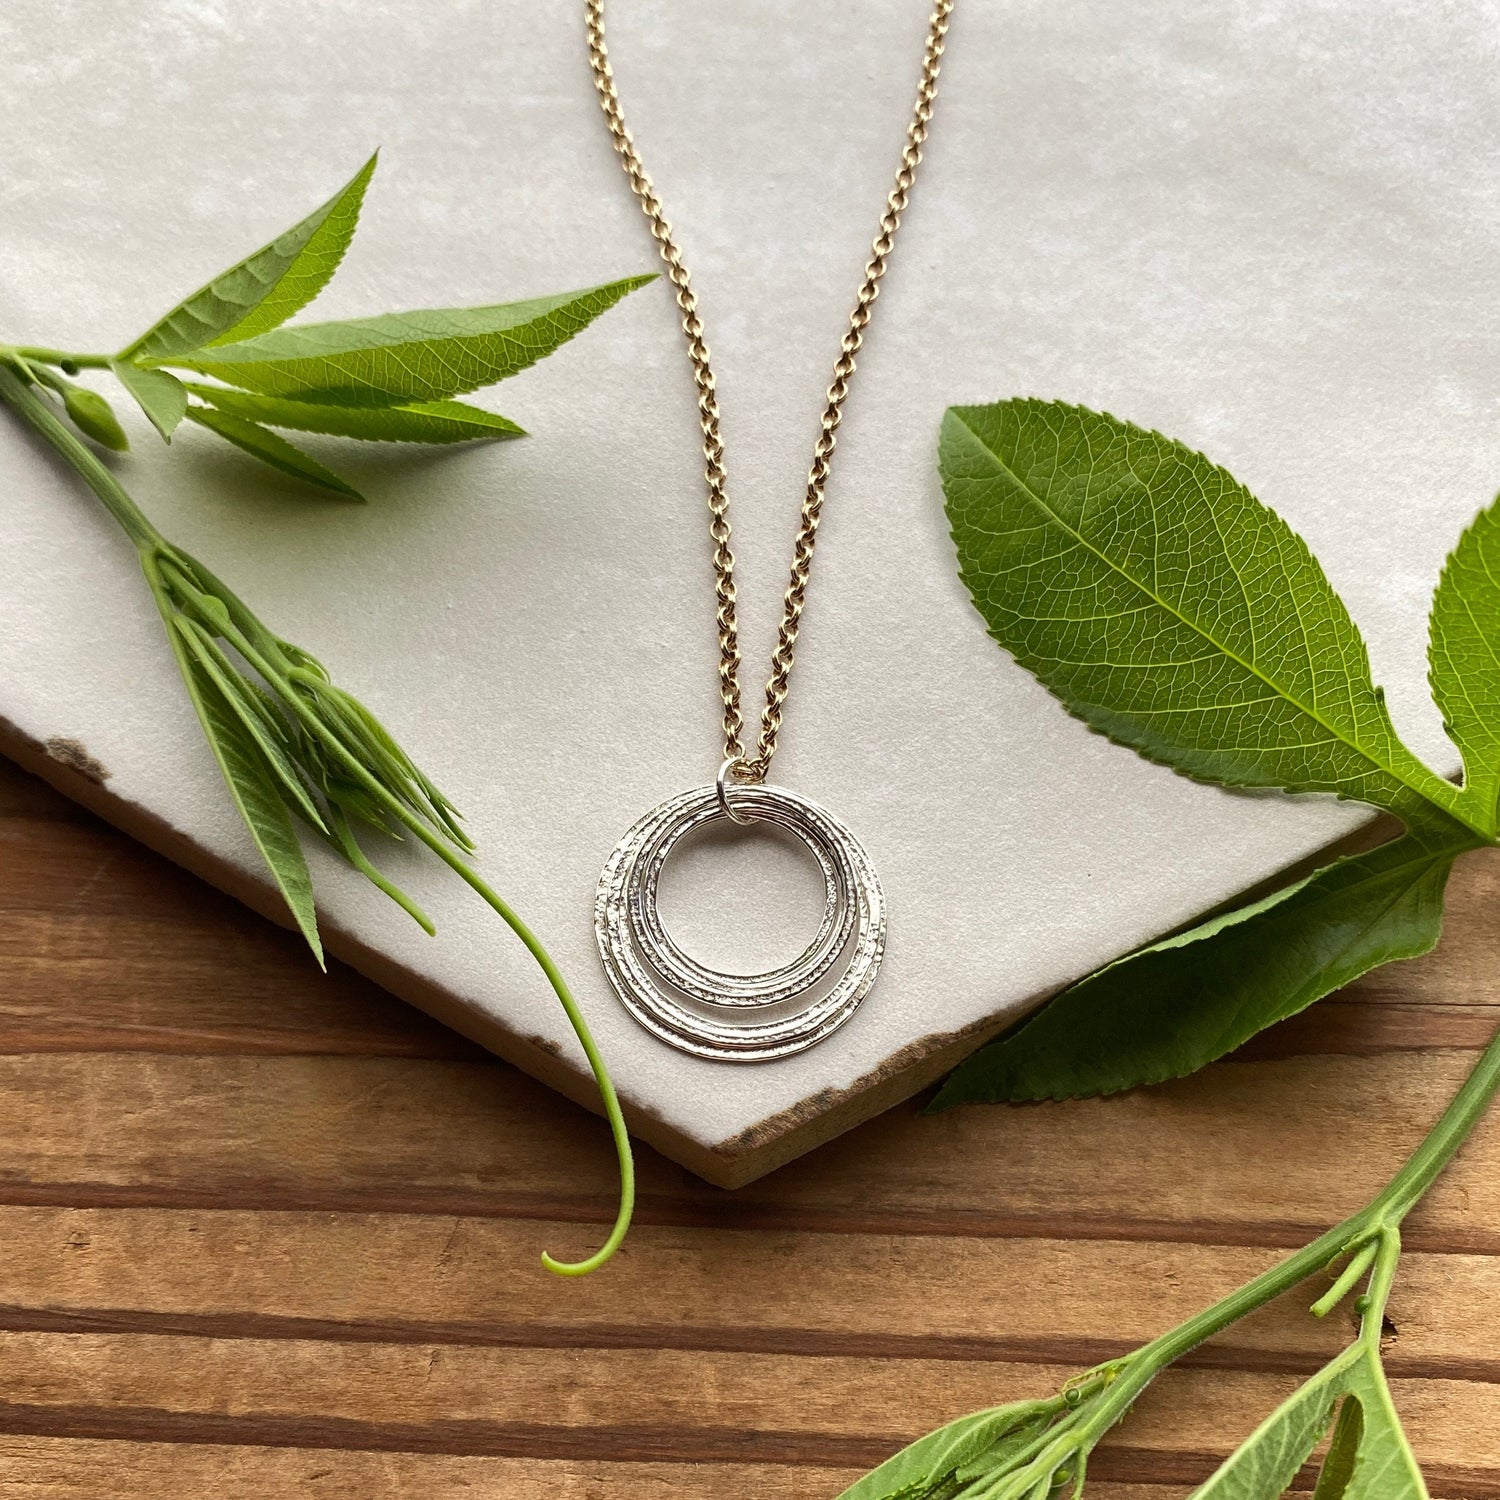 Six Circle 60th Minimalist Mixed Metal Milestone Birthday Necklace, 6 Rings for 6 Decades Handcrafted Perfectly Imperfect 6 Circle Pendant